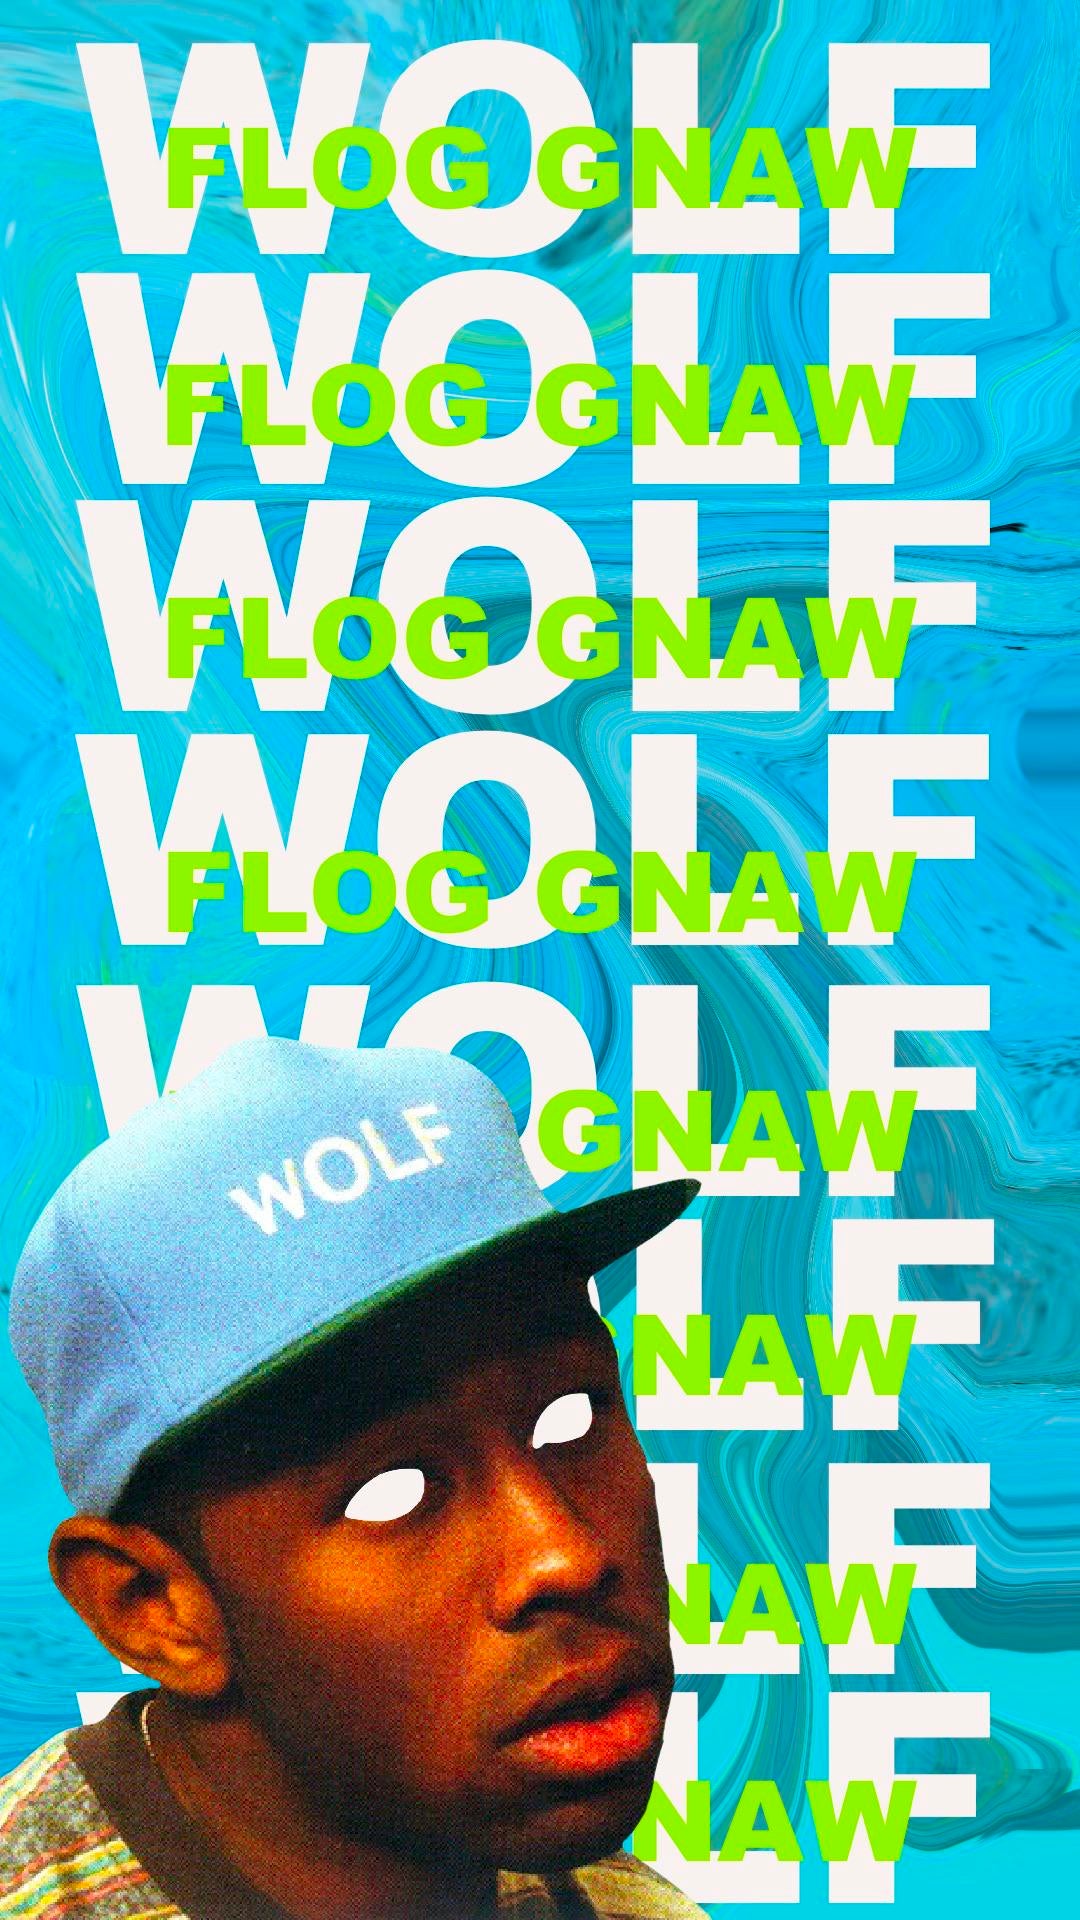 Wolf wallpaper (Free for anyone to use)